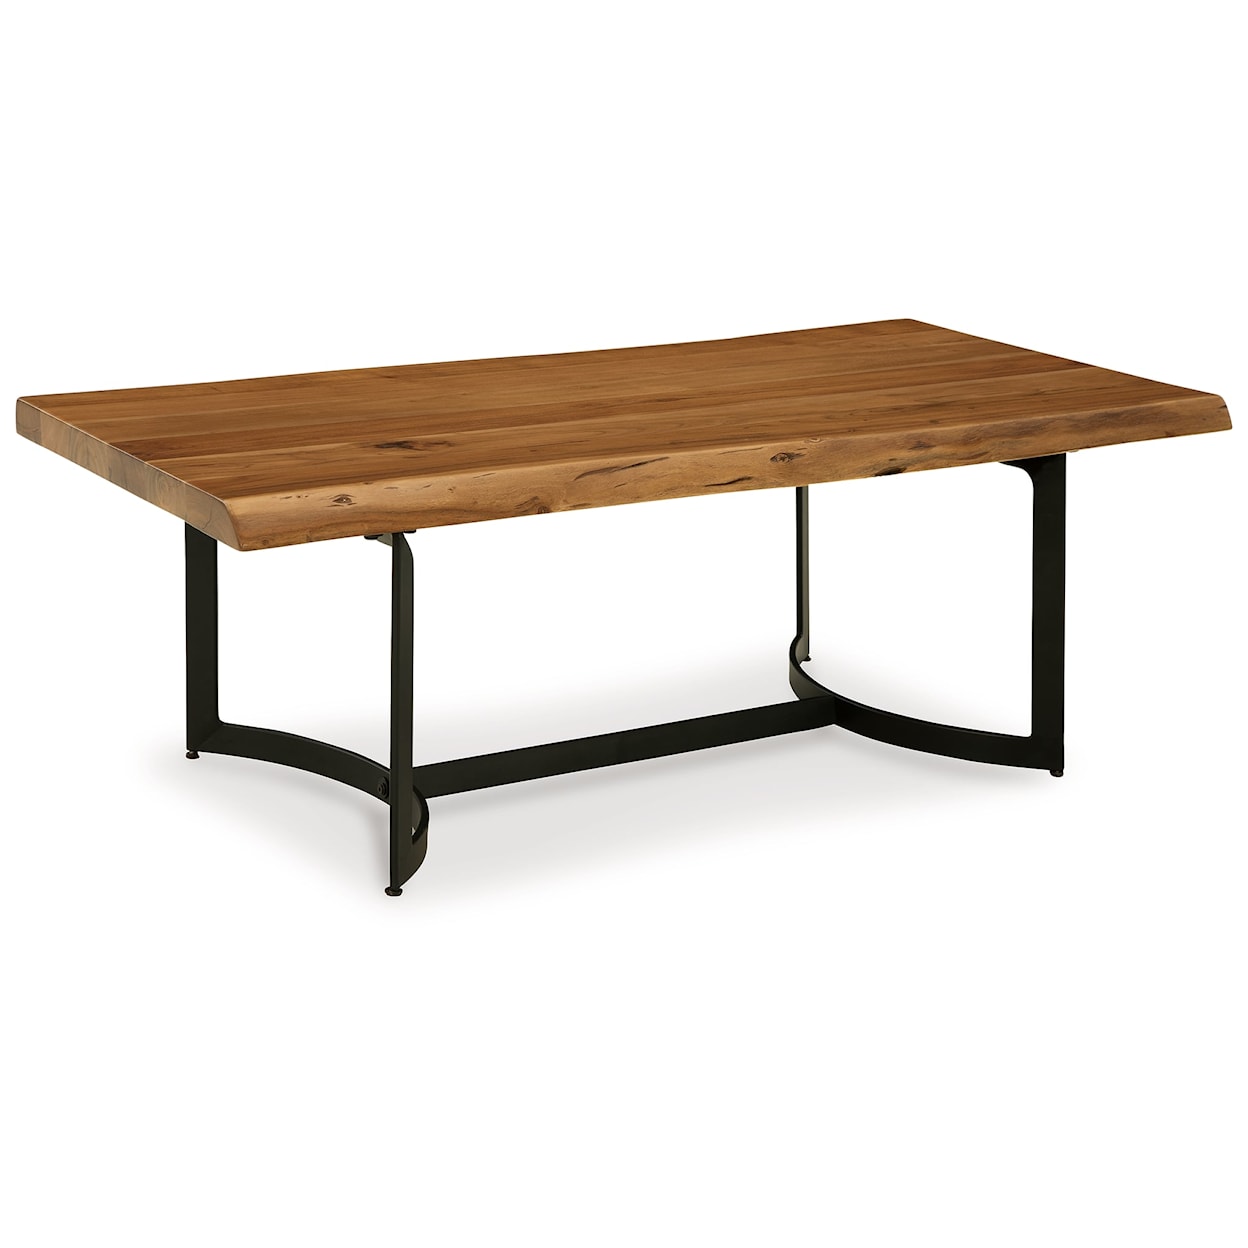 Signature Design by Ashley Fortmaine Rectangular Coffee Table